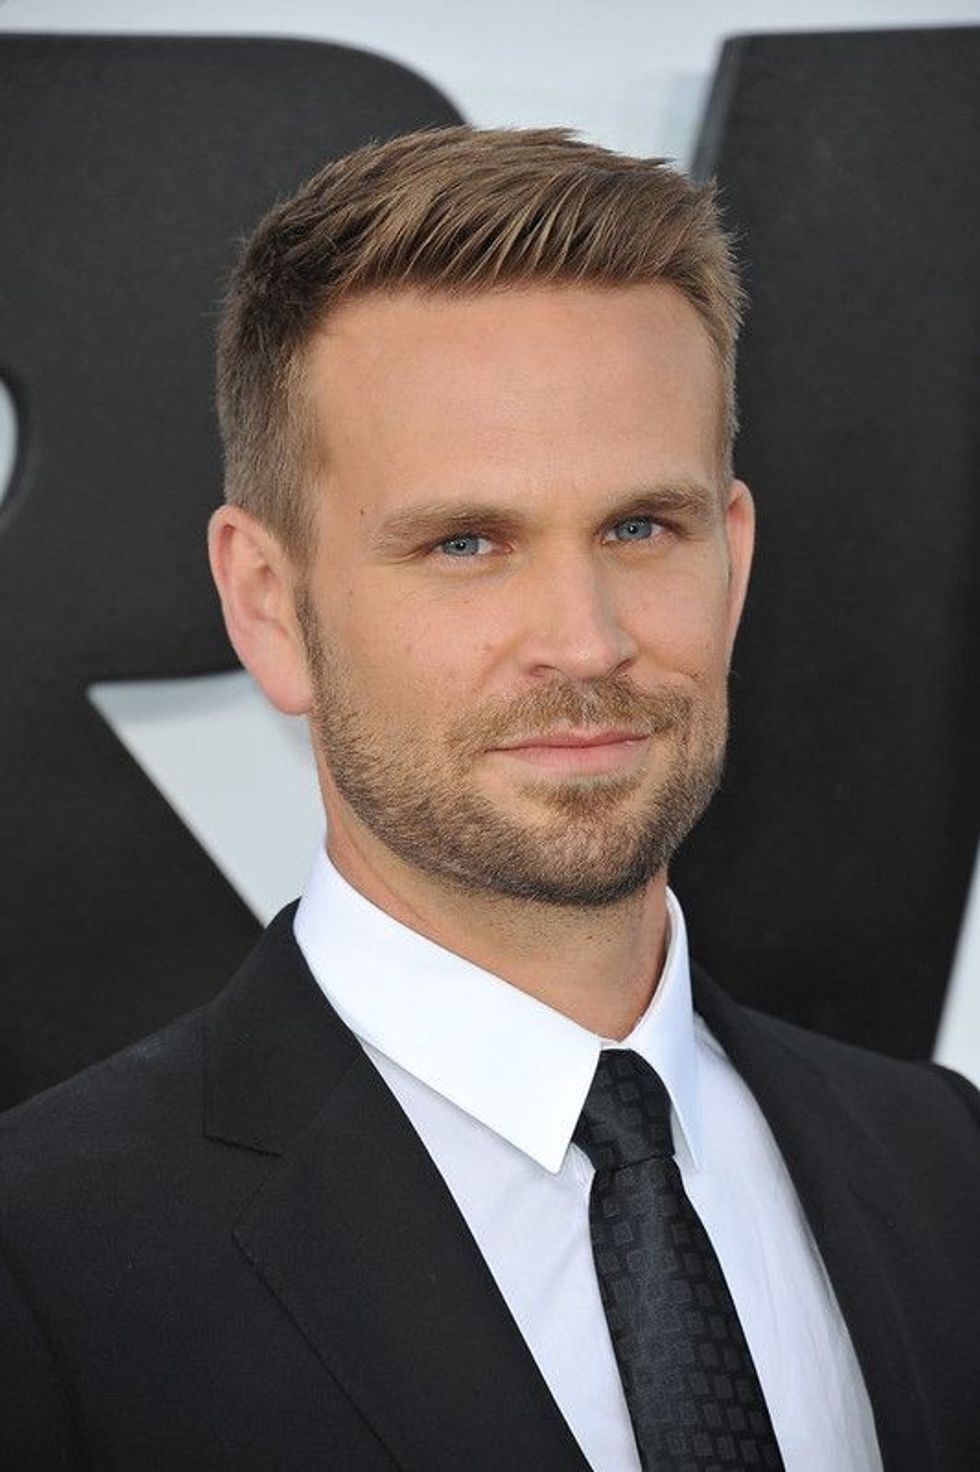 John Brotherton has starred in many blockbuster Hollywood movies, some of which you will be surprised to know about.